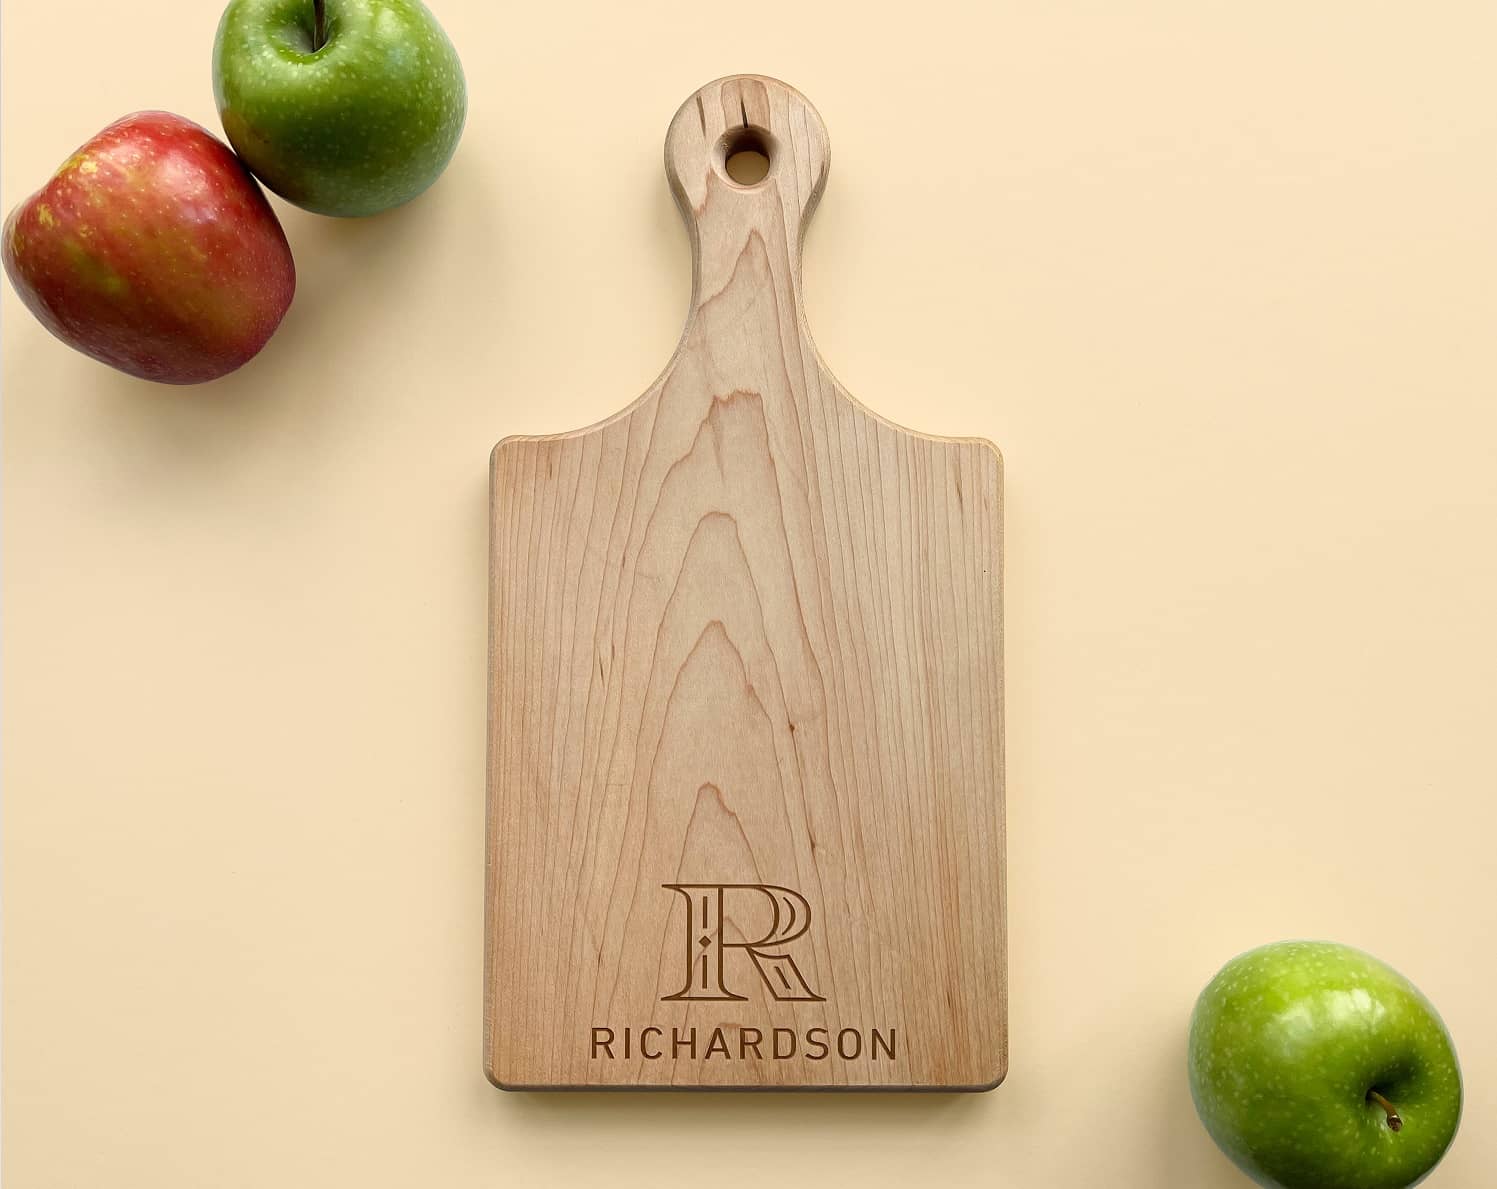 https://cuttingboard.ca/wp-content/uploads/2022/01/Personalized_and_Engraved_Wood_Serving_Board_With_Handle_Engraved_Name_Initial.jpg